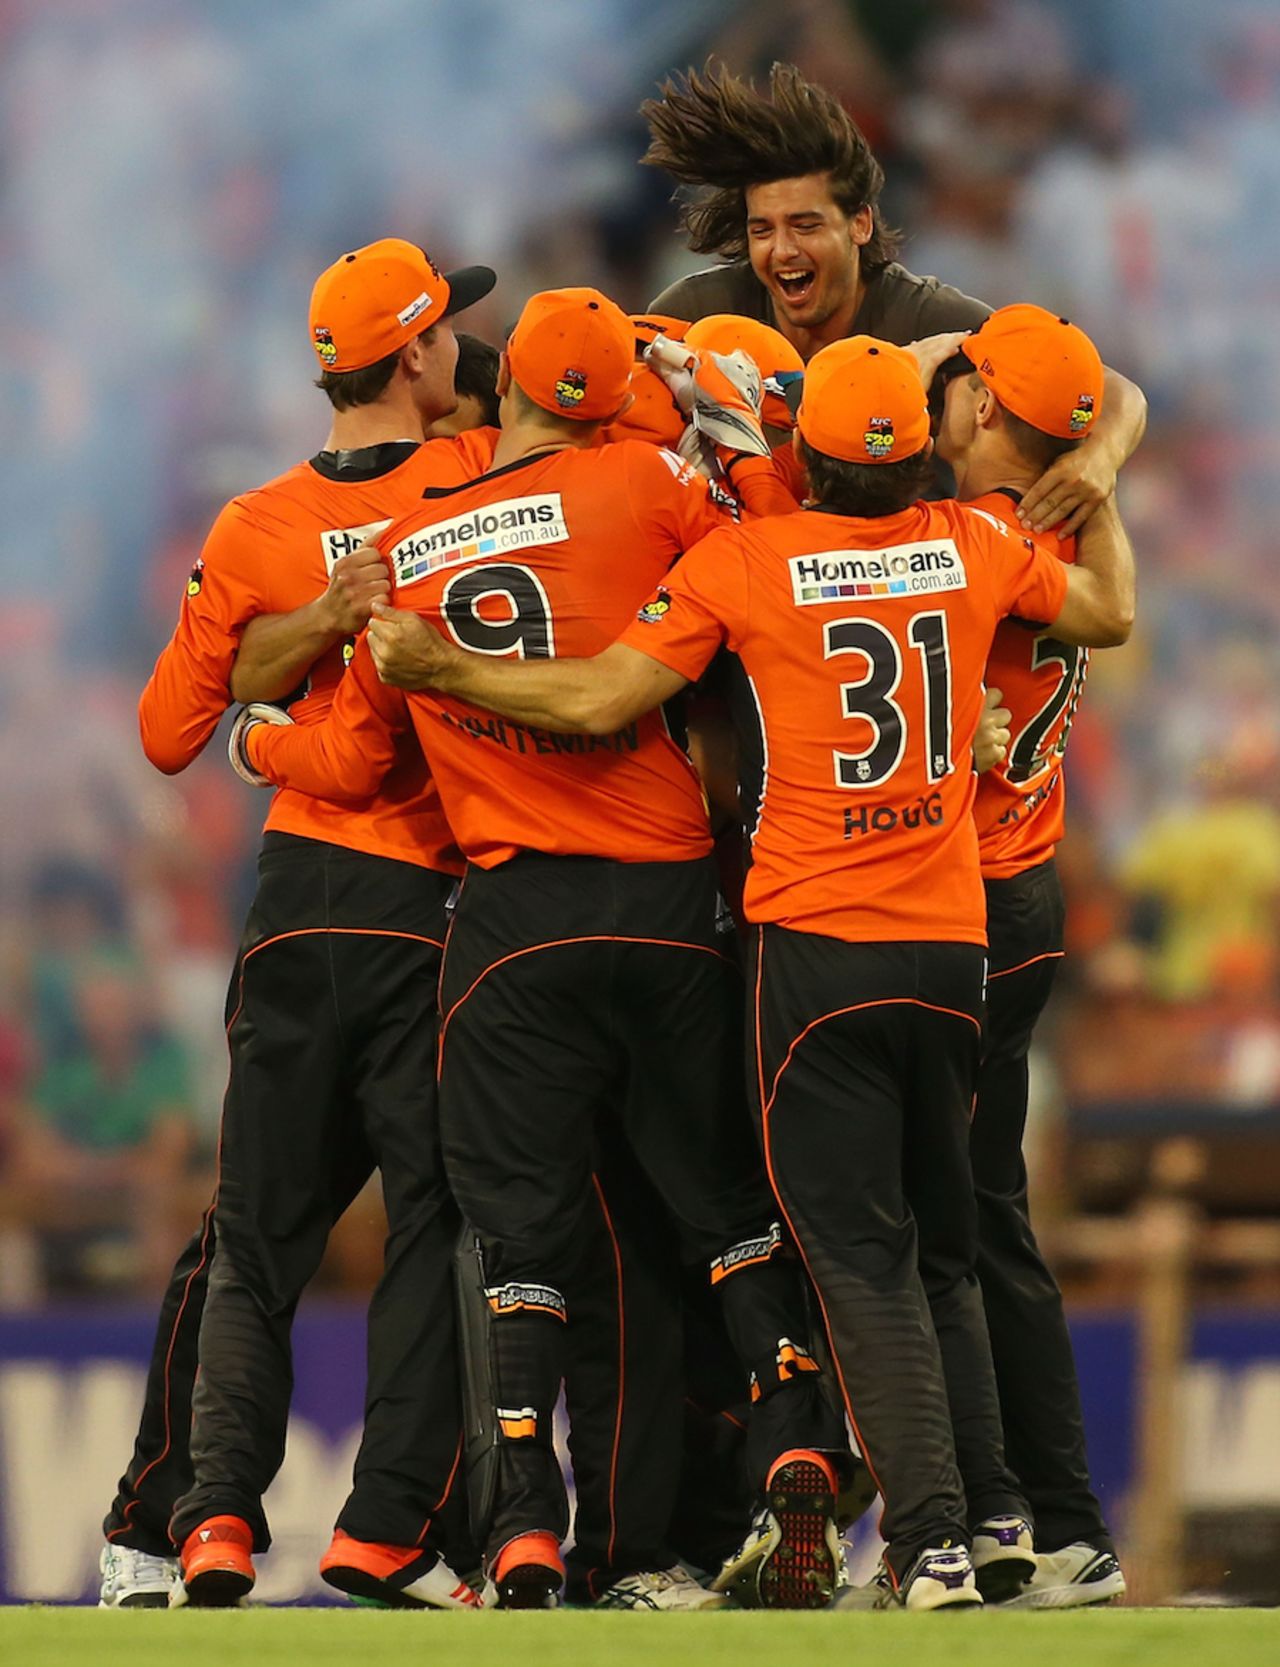 A spectator joins the Perth Scorchers players after their win, Perth Scorchers v Melbourne Stars, Big Bash League 2014-15, semi-final, Perth, January 25, 2015